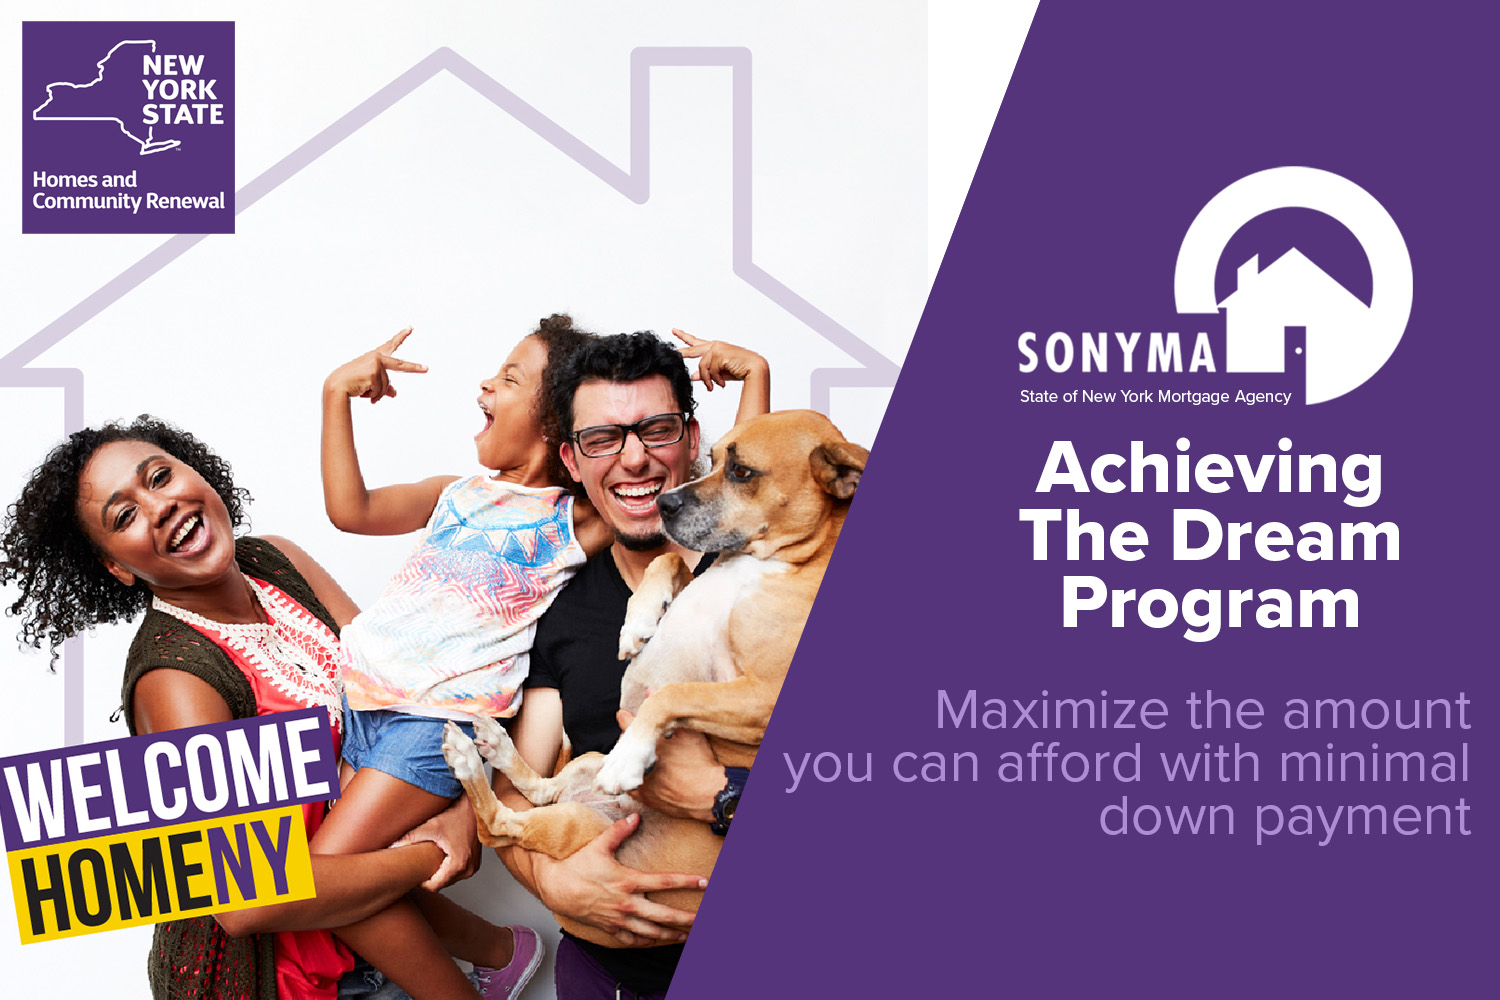 nys-hcr-on-twitter-sonyma-s-achieving-the-dream-program-is-designed